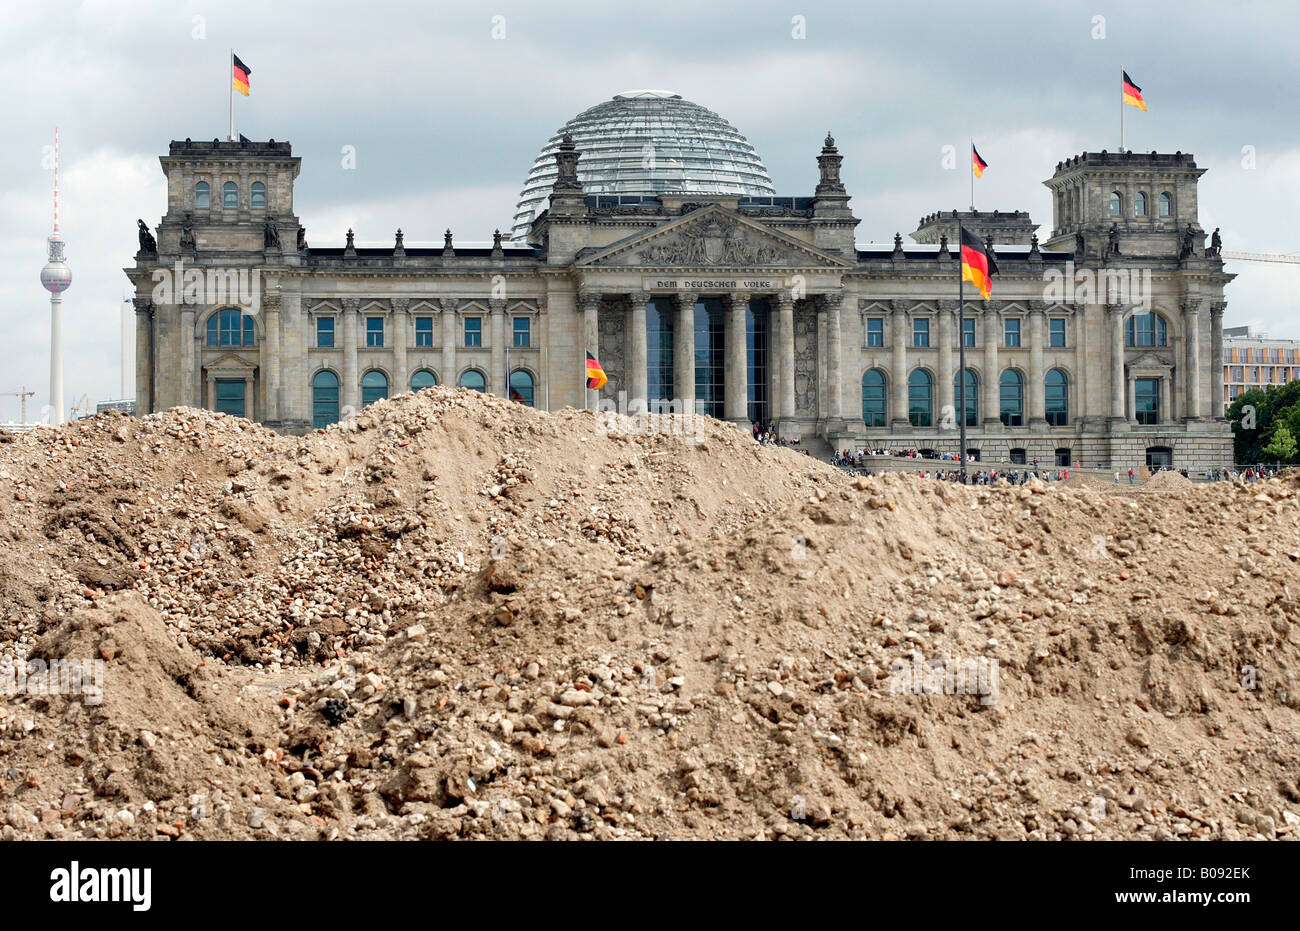 Reichstag, German parliament building sinking in the sand, Berlin, Germany Stock Photo